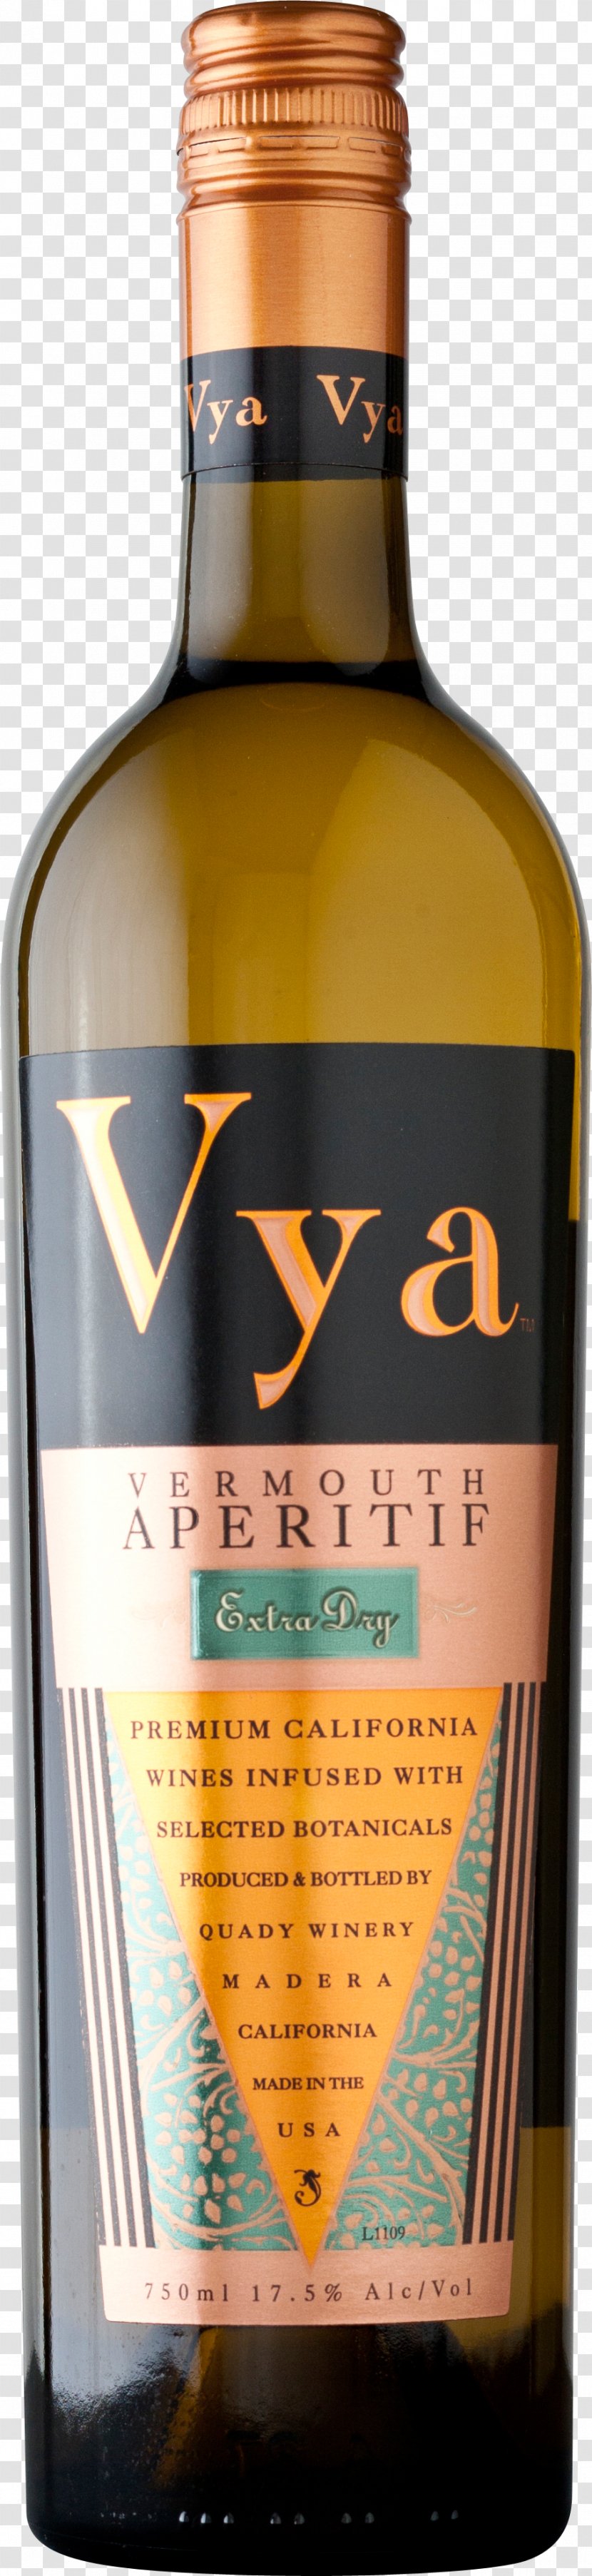 Vermouth Fortified Wine Vya Martini - Bottle Transparent PNG